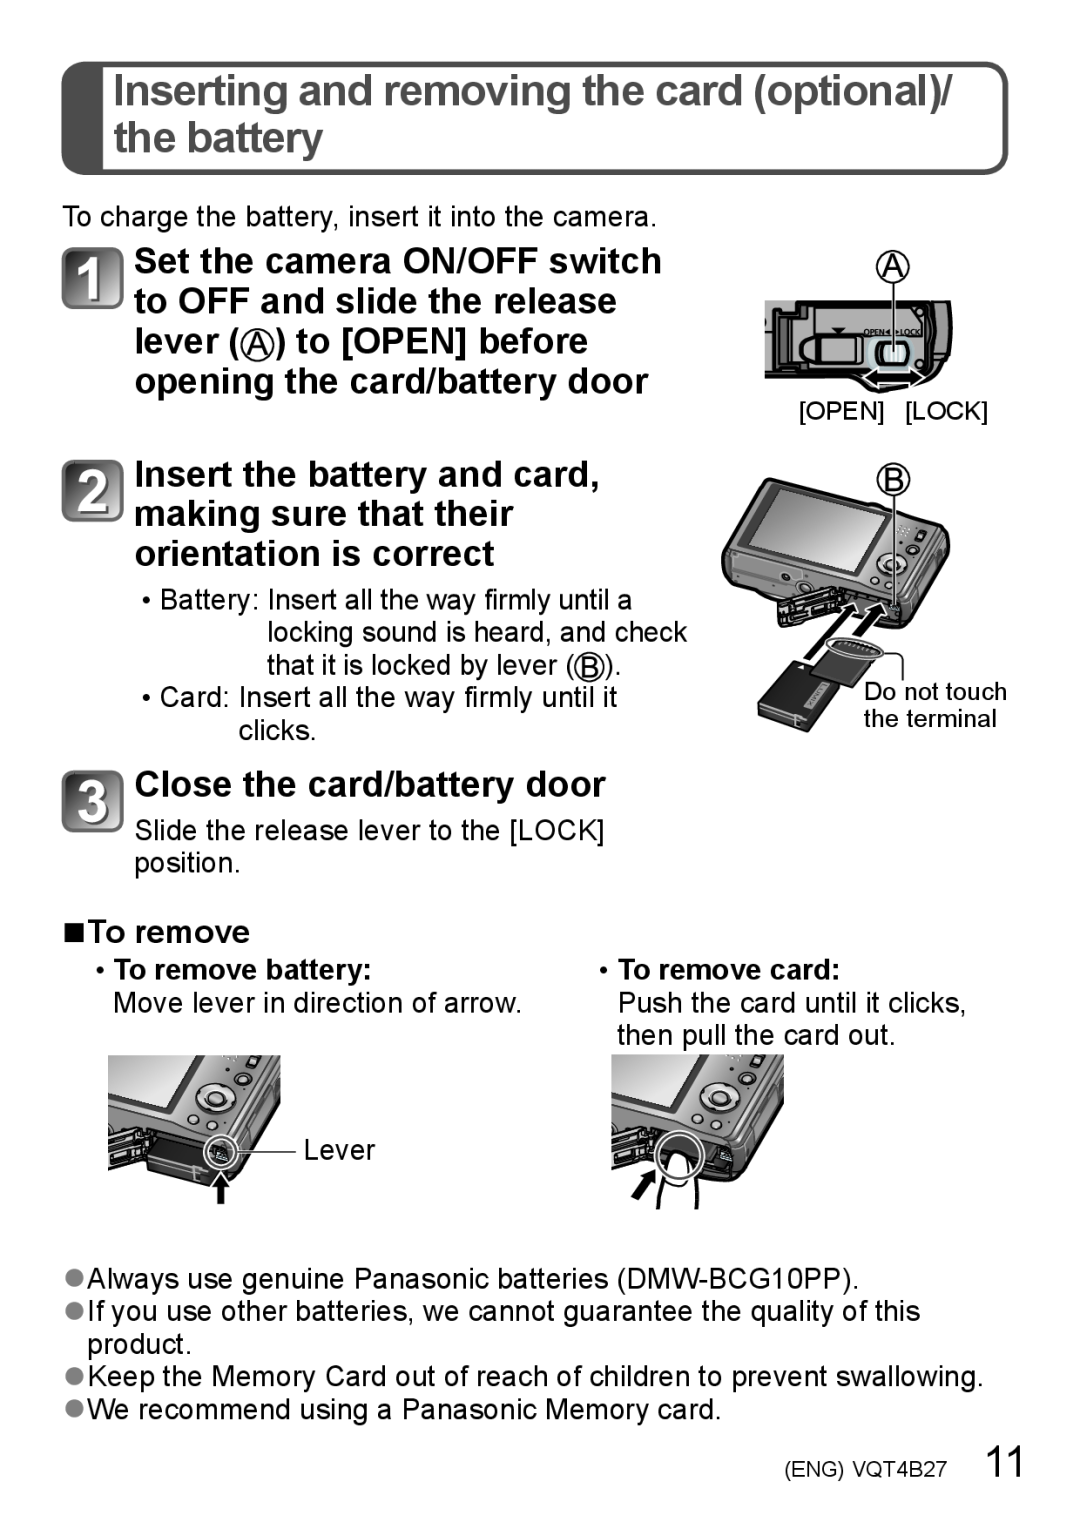 Panasonic DMC-ZS15S, M1211KZ0, VQT4B27 Inserting and removing the card optional/ the battery, Close the card/battery door 